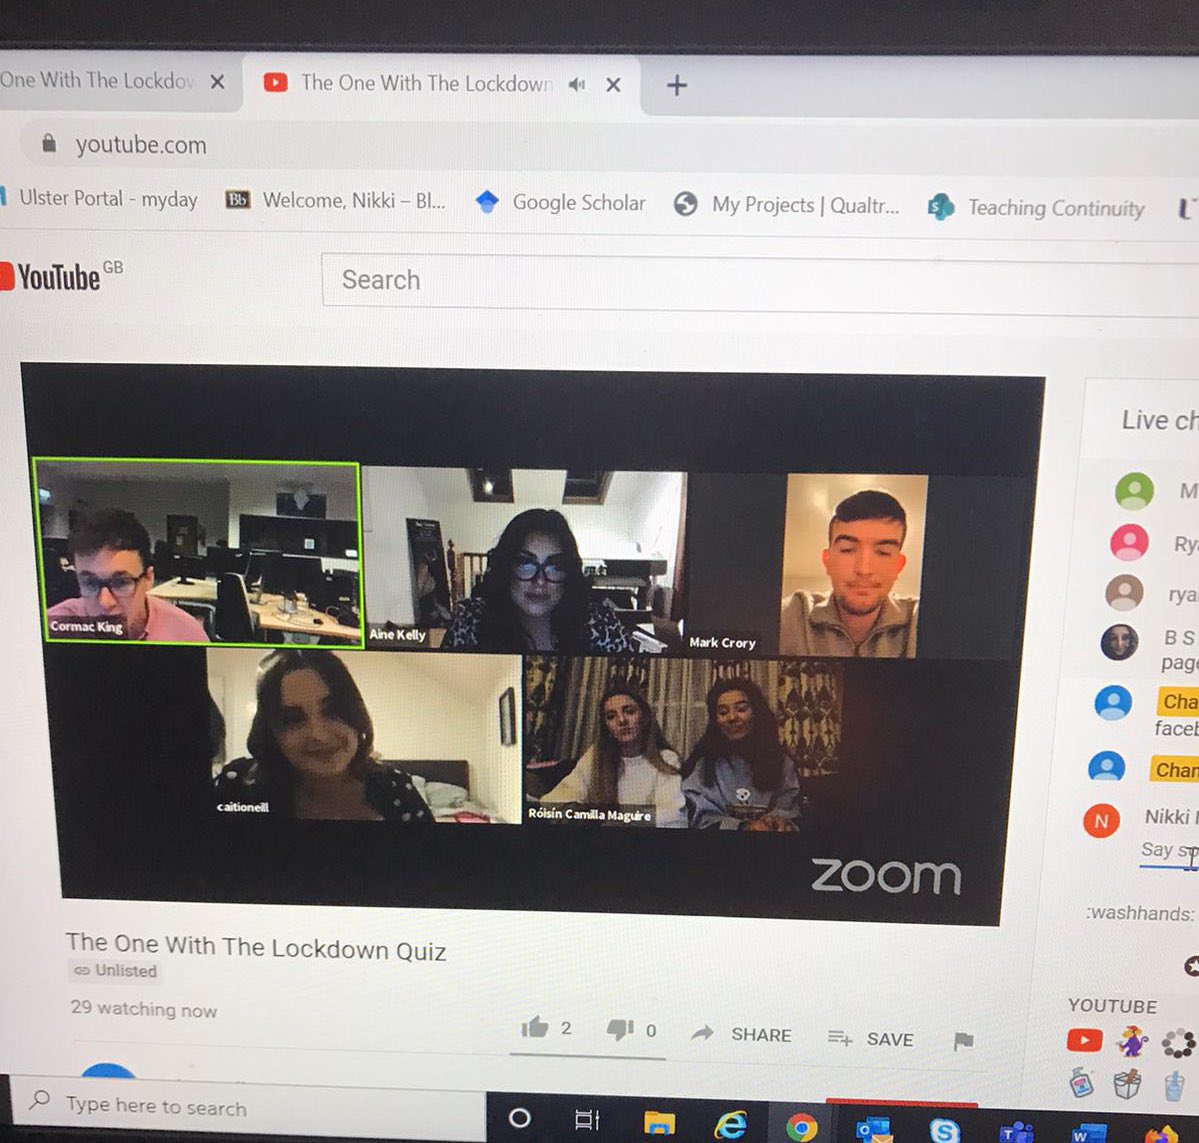 Our first attempt at a real life virtual event as part of our @UlsterBizSchool Events Management Module! 
Raising money @nichstweet in memory of our classmate Niall Lyttle. 
Great real life experience! 
#IHMUUBS #VirtualEvents